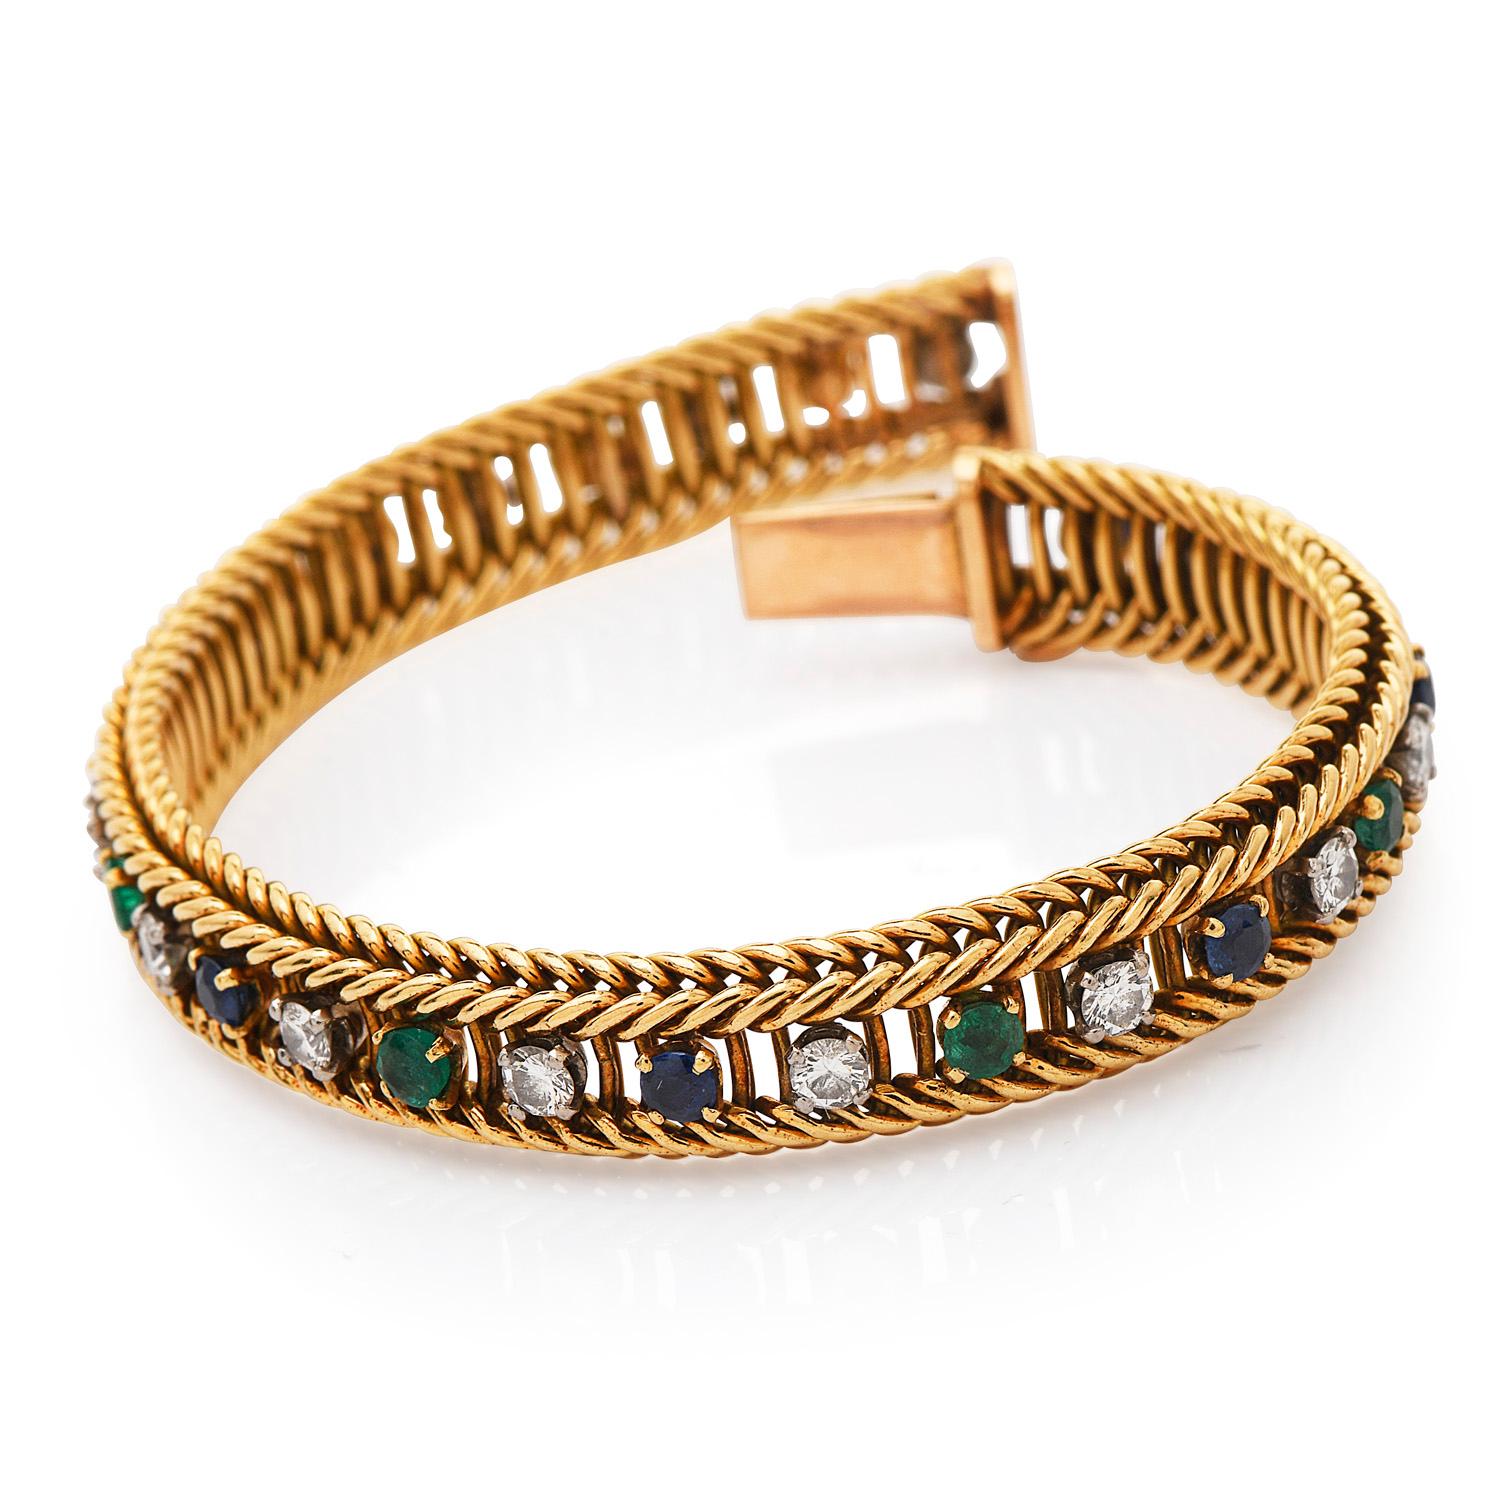 This 1960's Vintage Link Bracelet is Carefully Crafted in solid heavy 18K Yellow Gold,

Unifying every Link there are (15) round-cut, prong-set diamonds

with a total weight of approx.  2,00  carats, G-H color, and VS clarity. 

The center of each